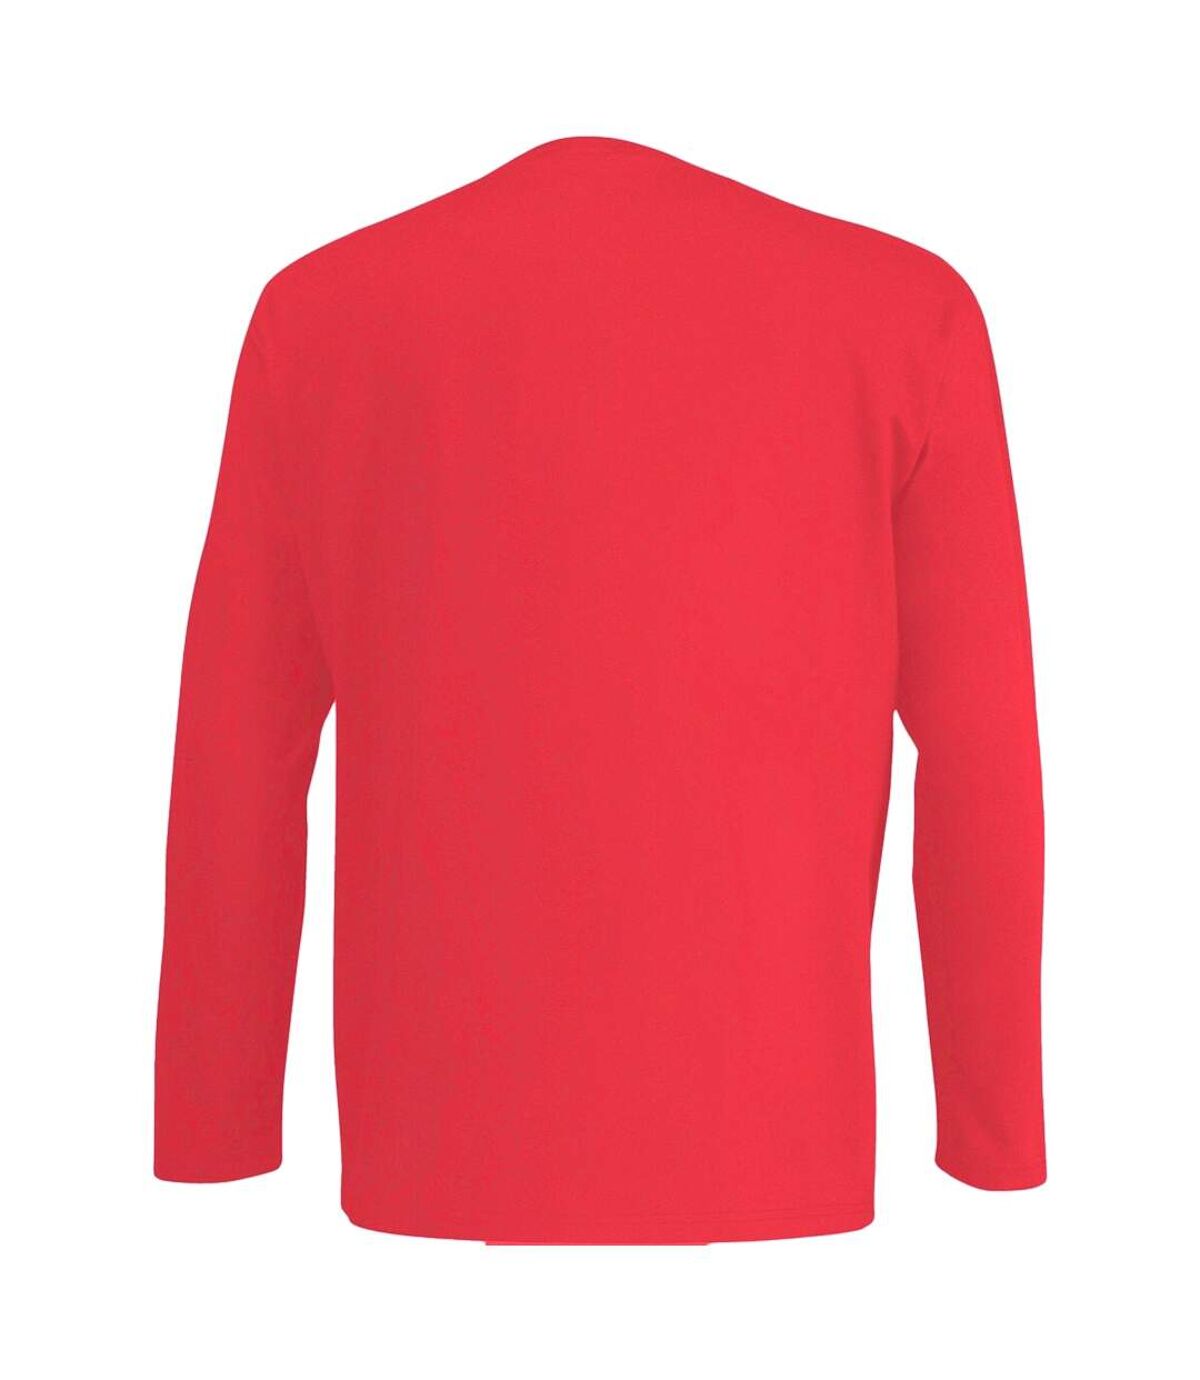 Fruit Of The Loom Mens Valueweight Crew Neck Long Sleeve T-Shirt (Red)